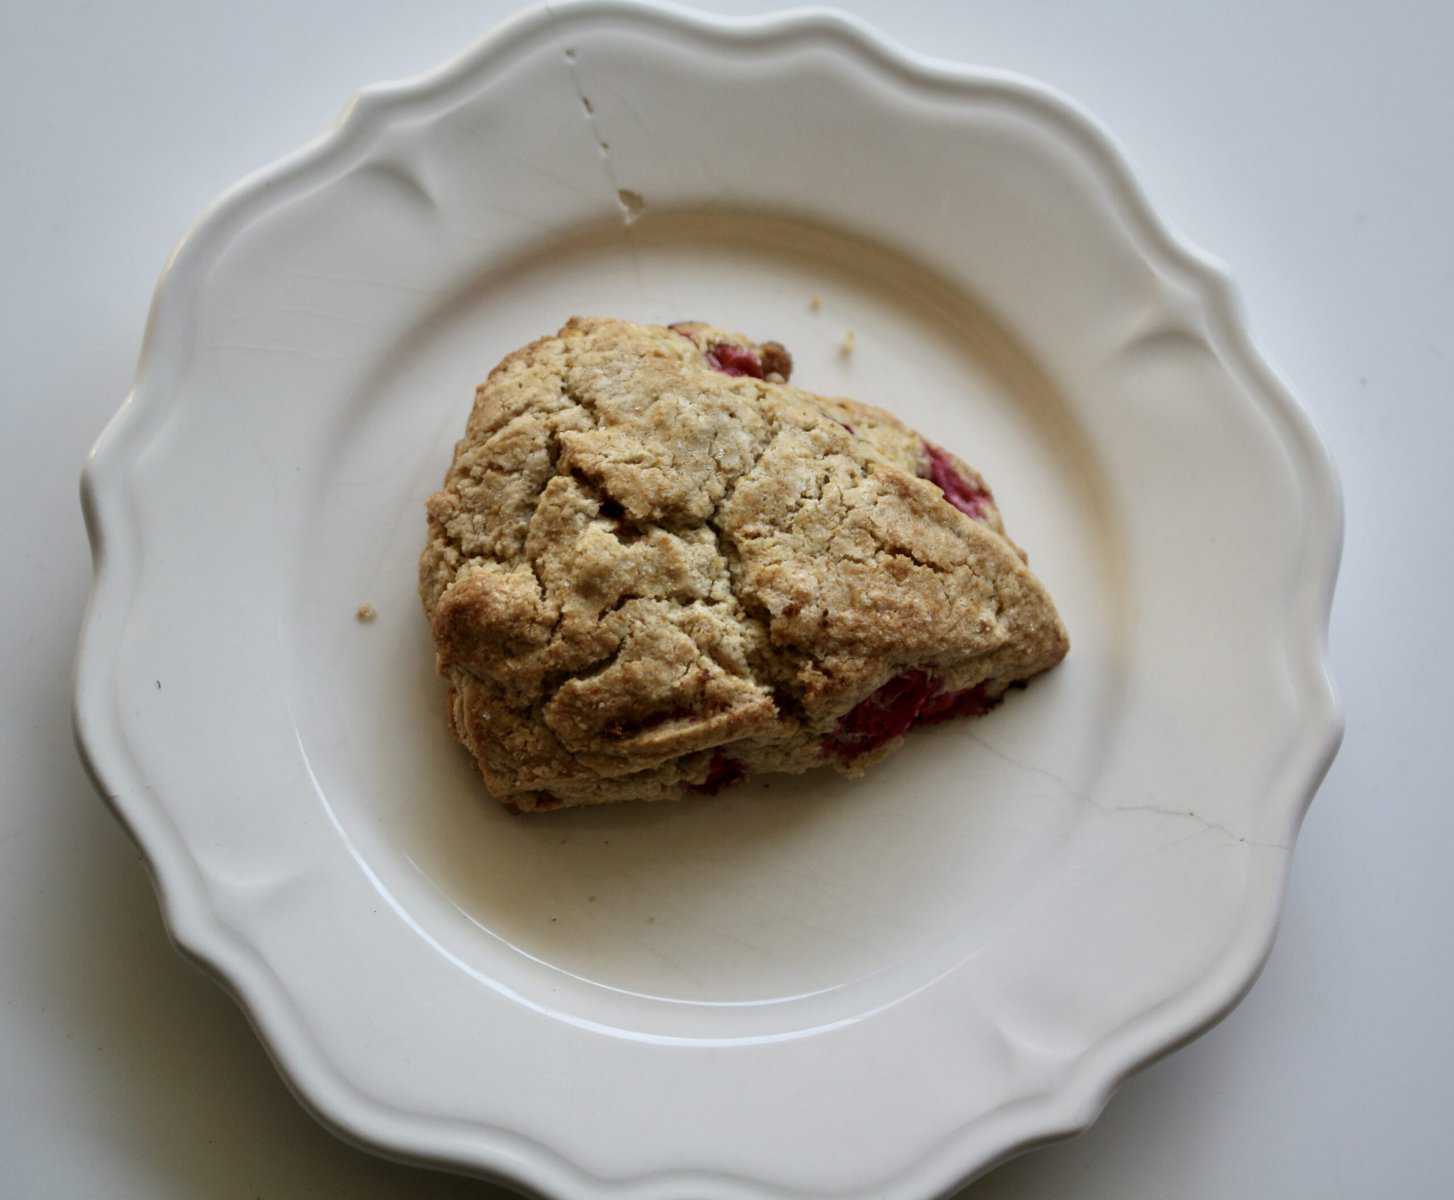 A cranberry scone on a plate.